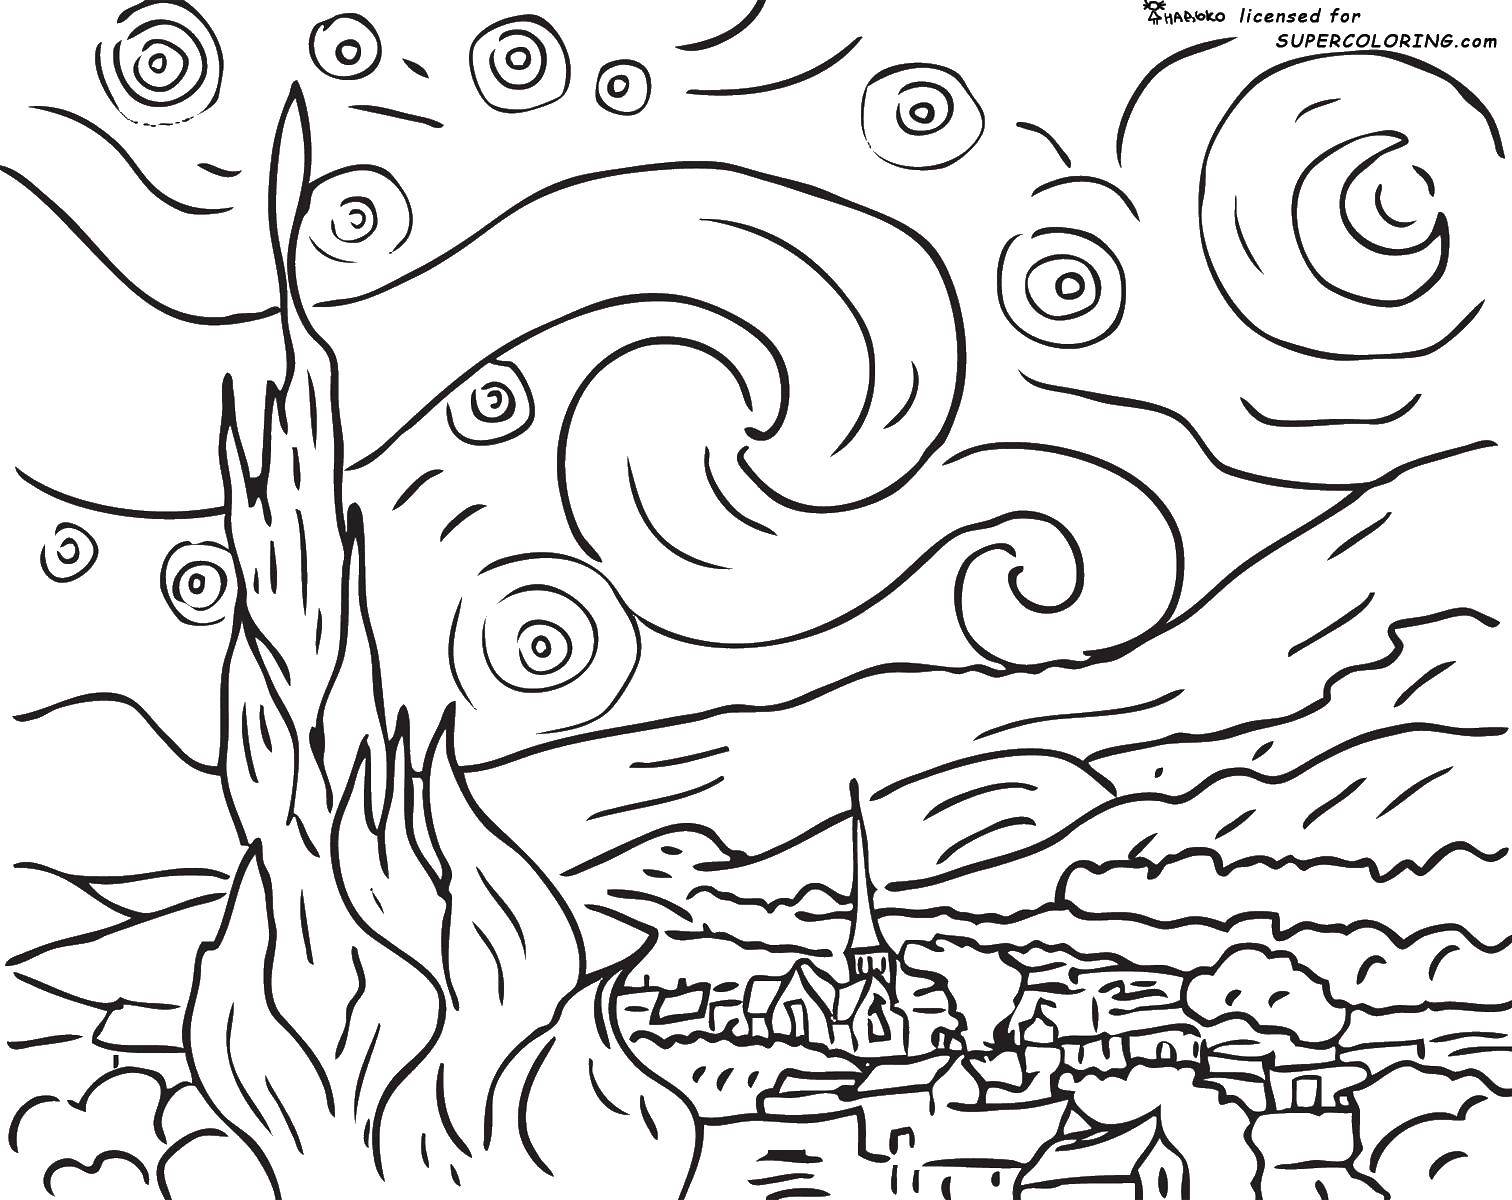 Coloring The city and the flames. Category the city. Tags:  city, flame.